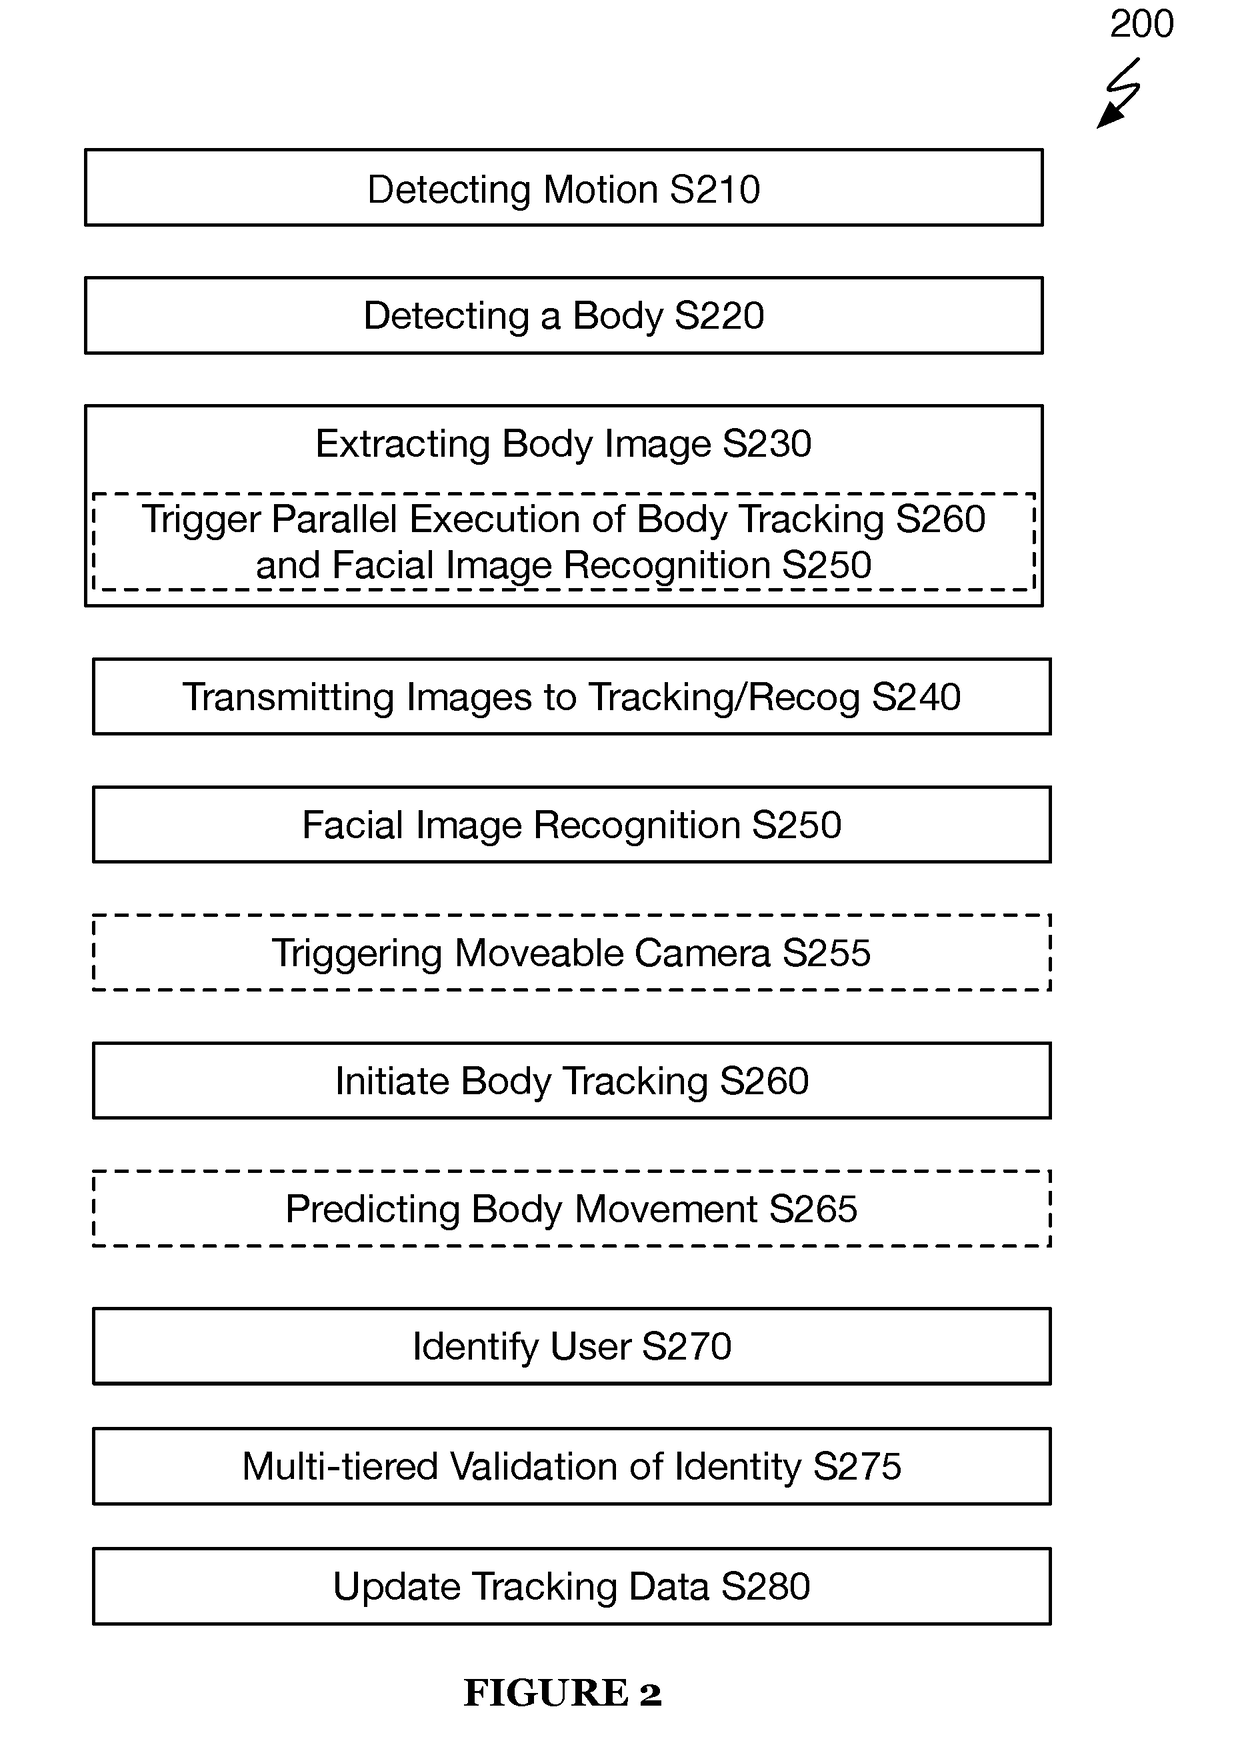 Systems and methods for user detection, identification, and localization within a defined space